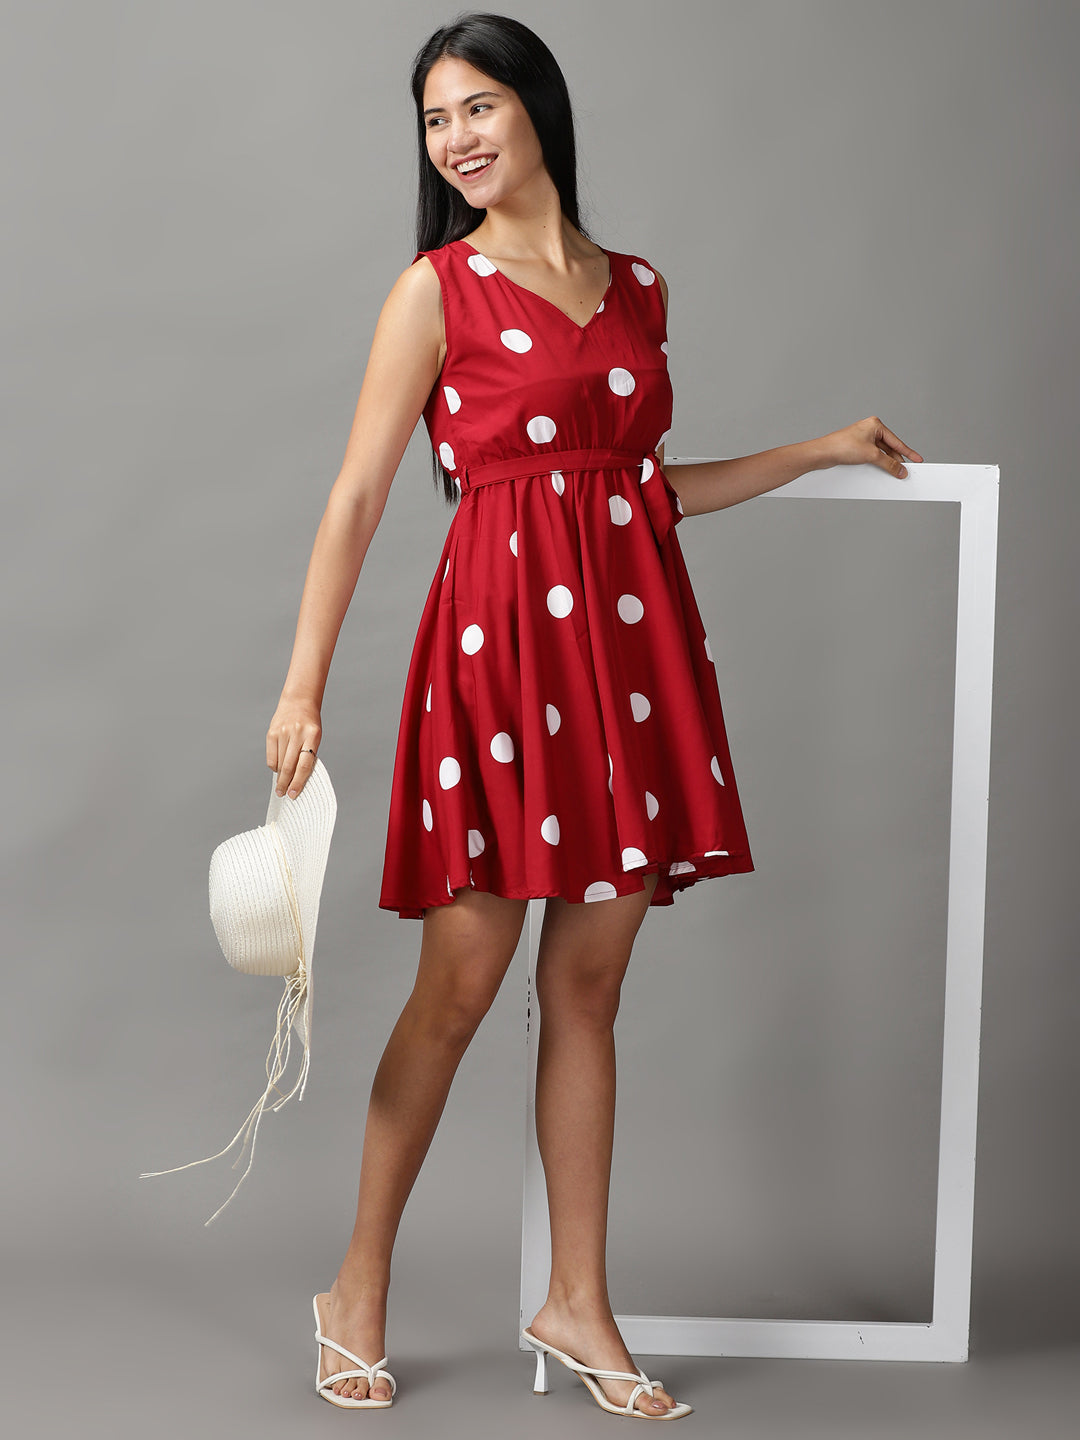 Women's Red Polka Dots Fit and Flare Dress